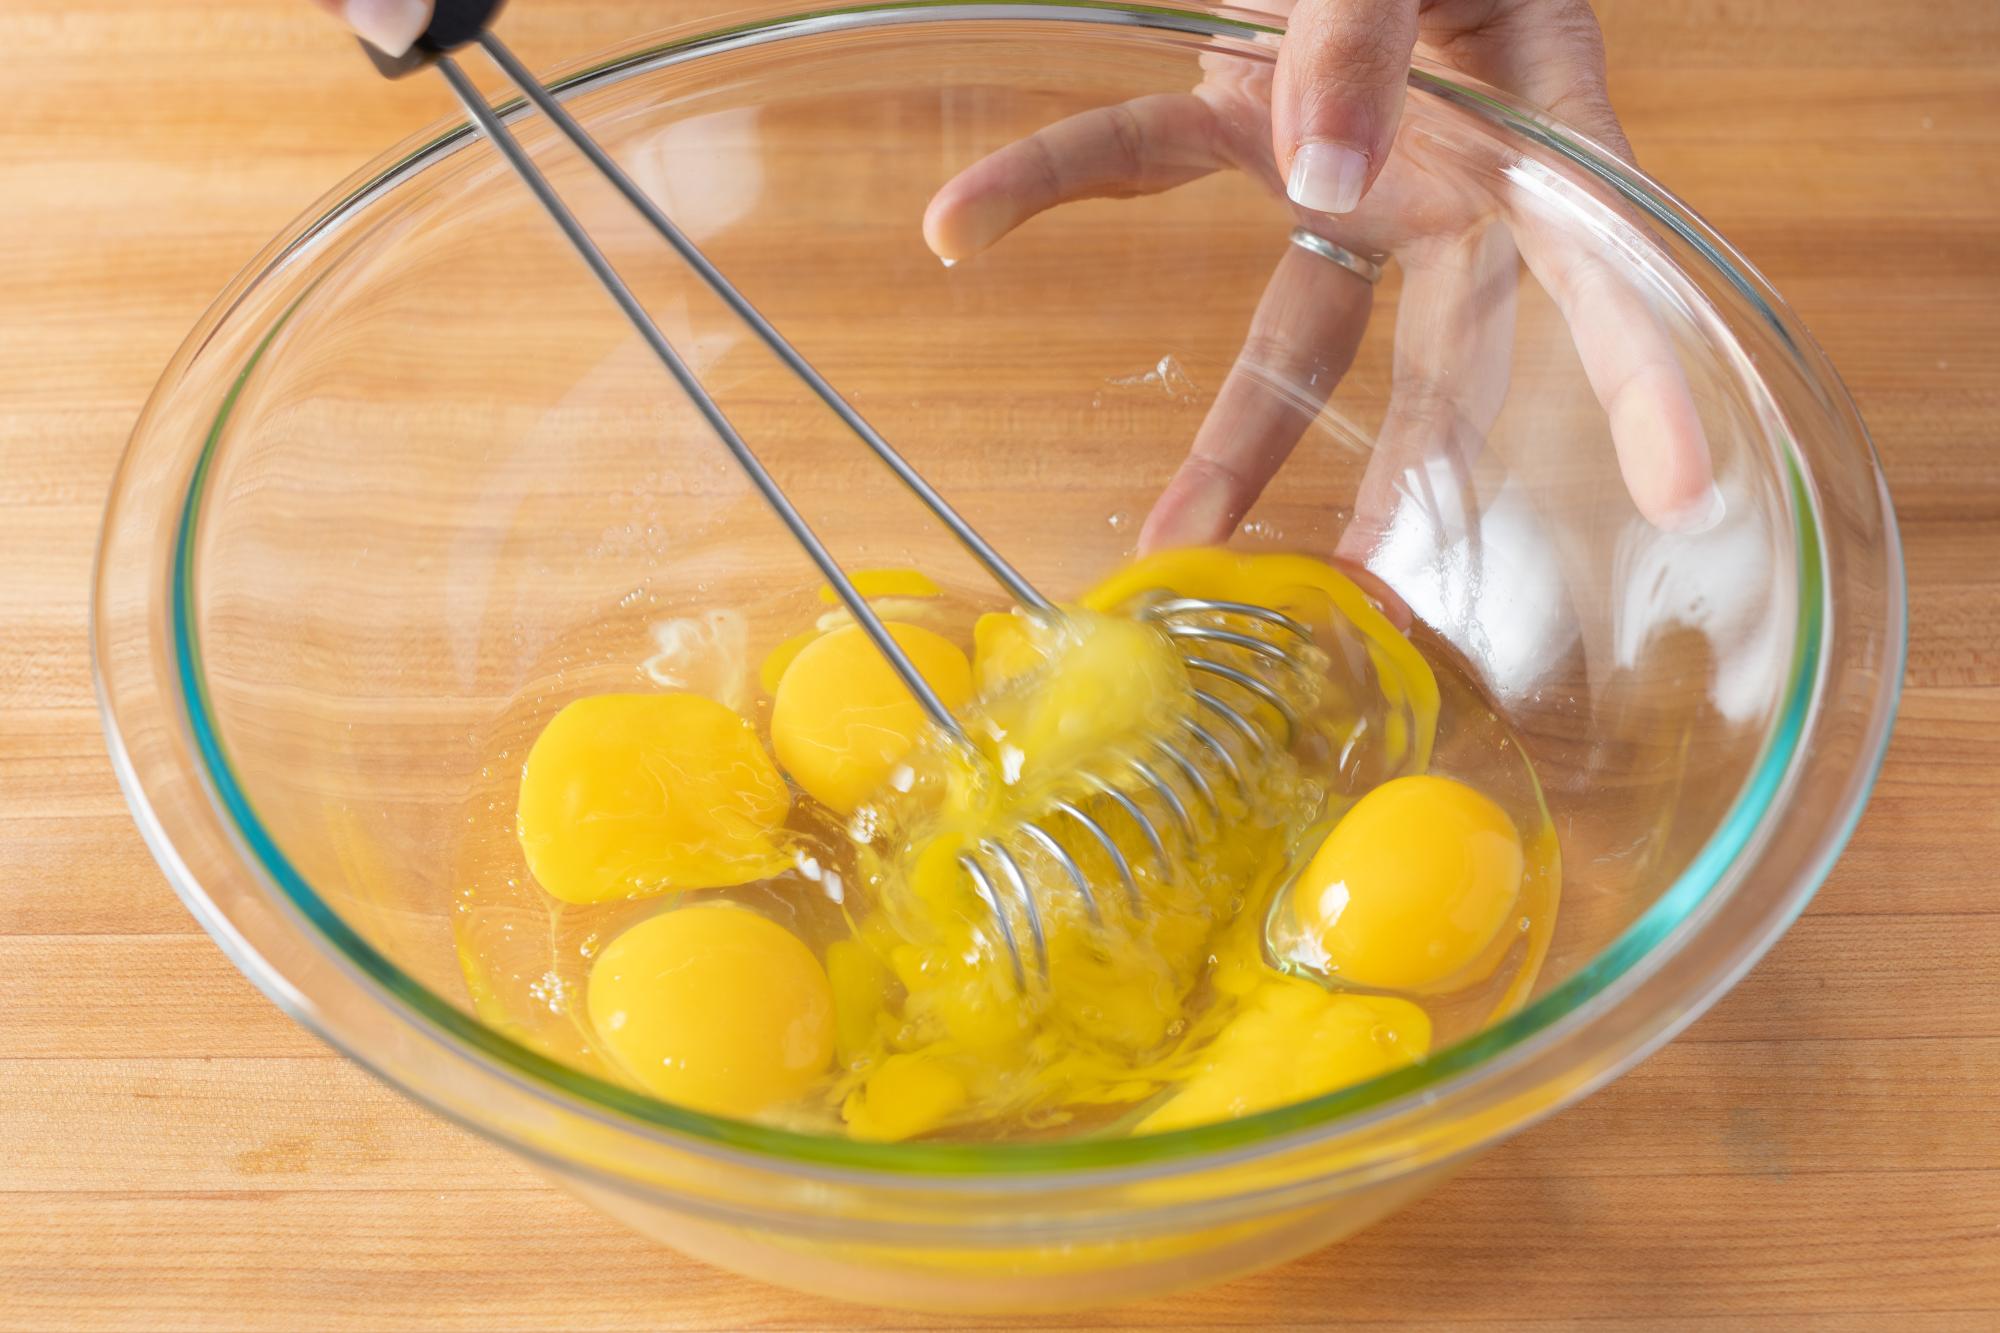 Blending the eggs with a Mix-Stir.